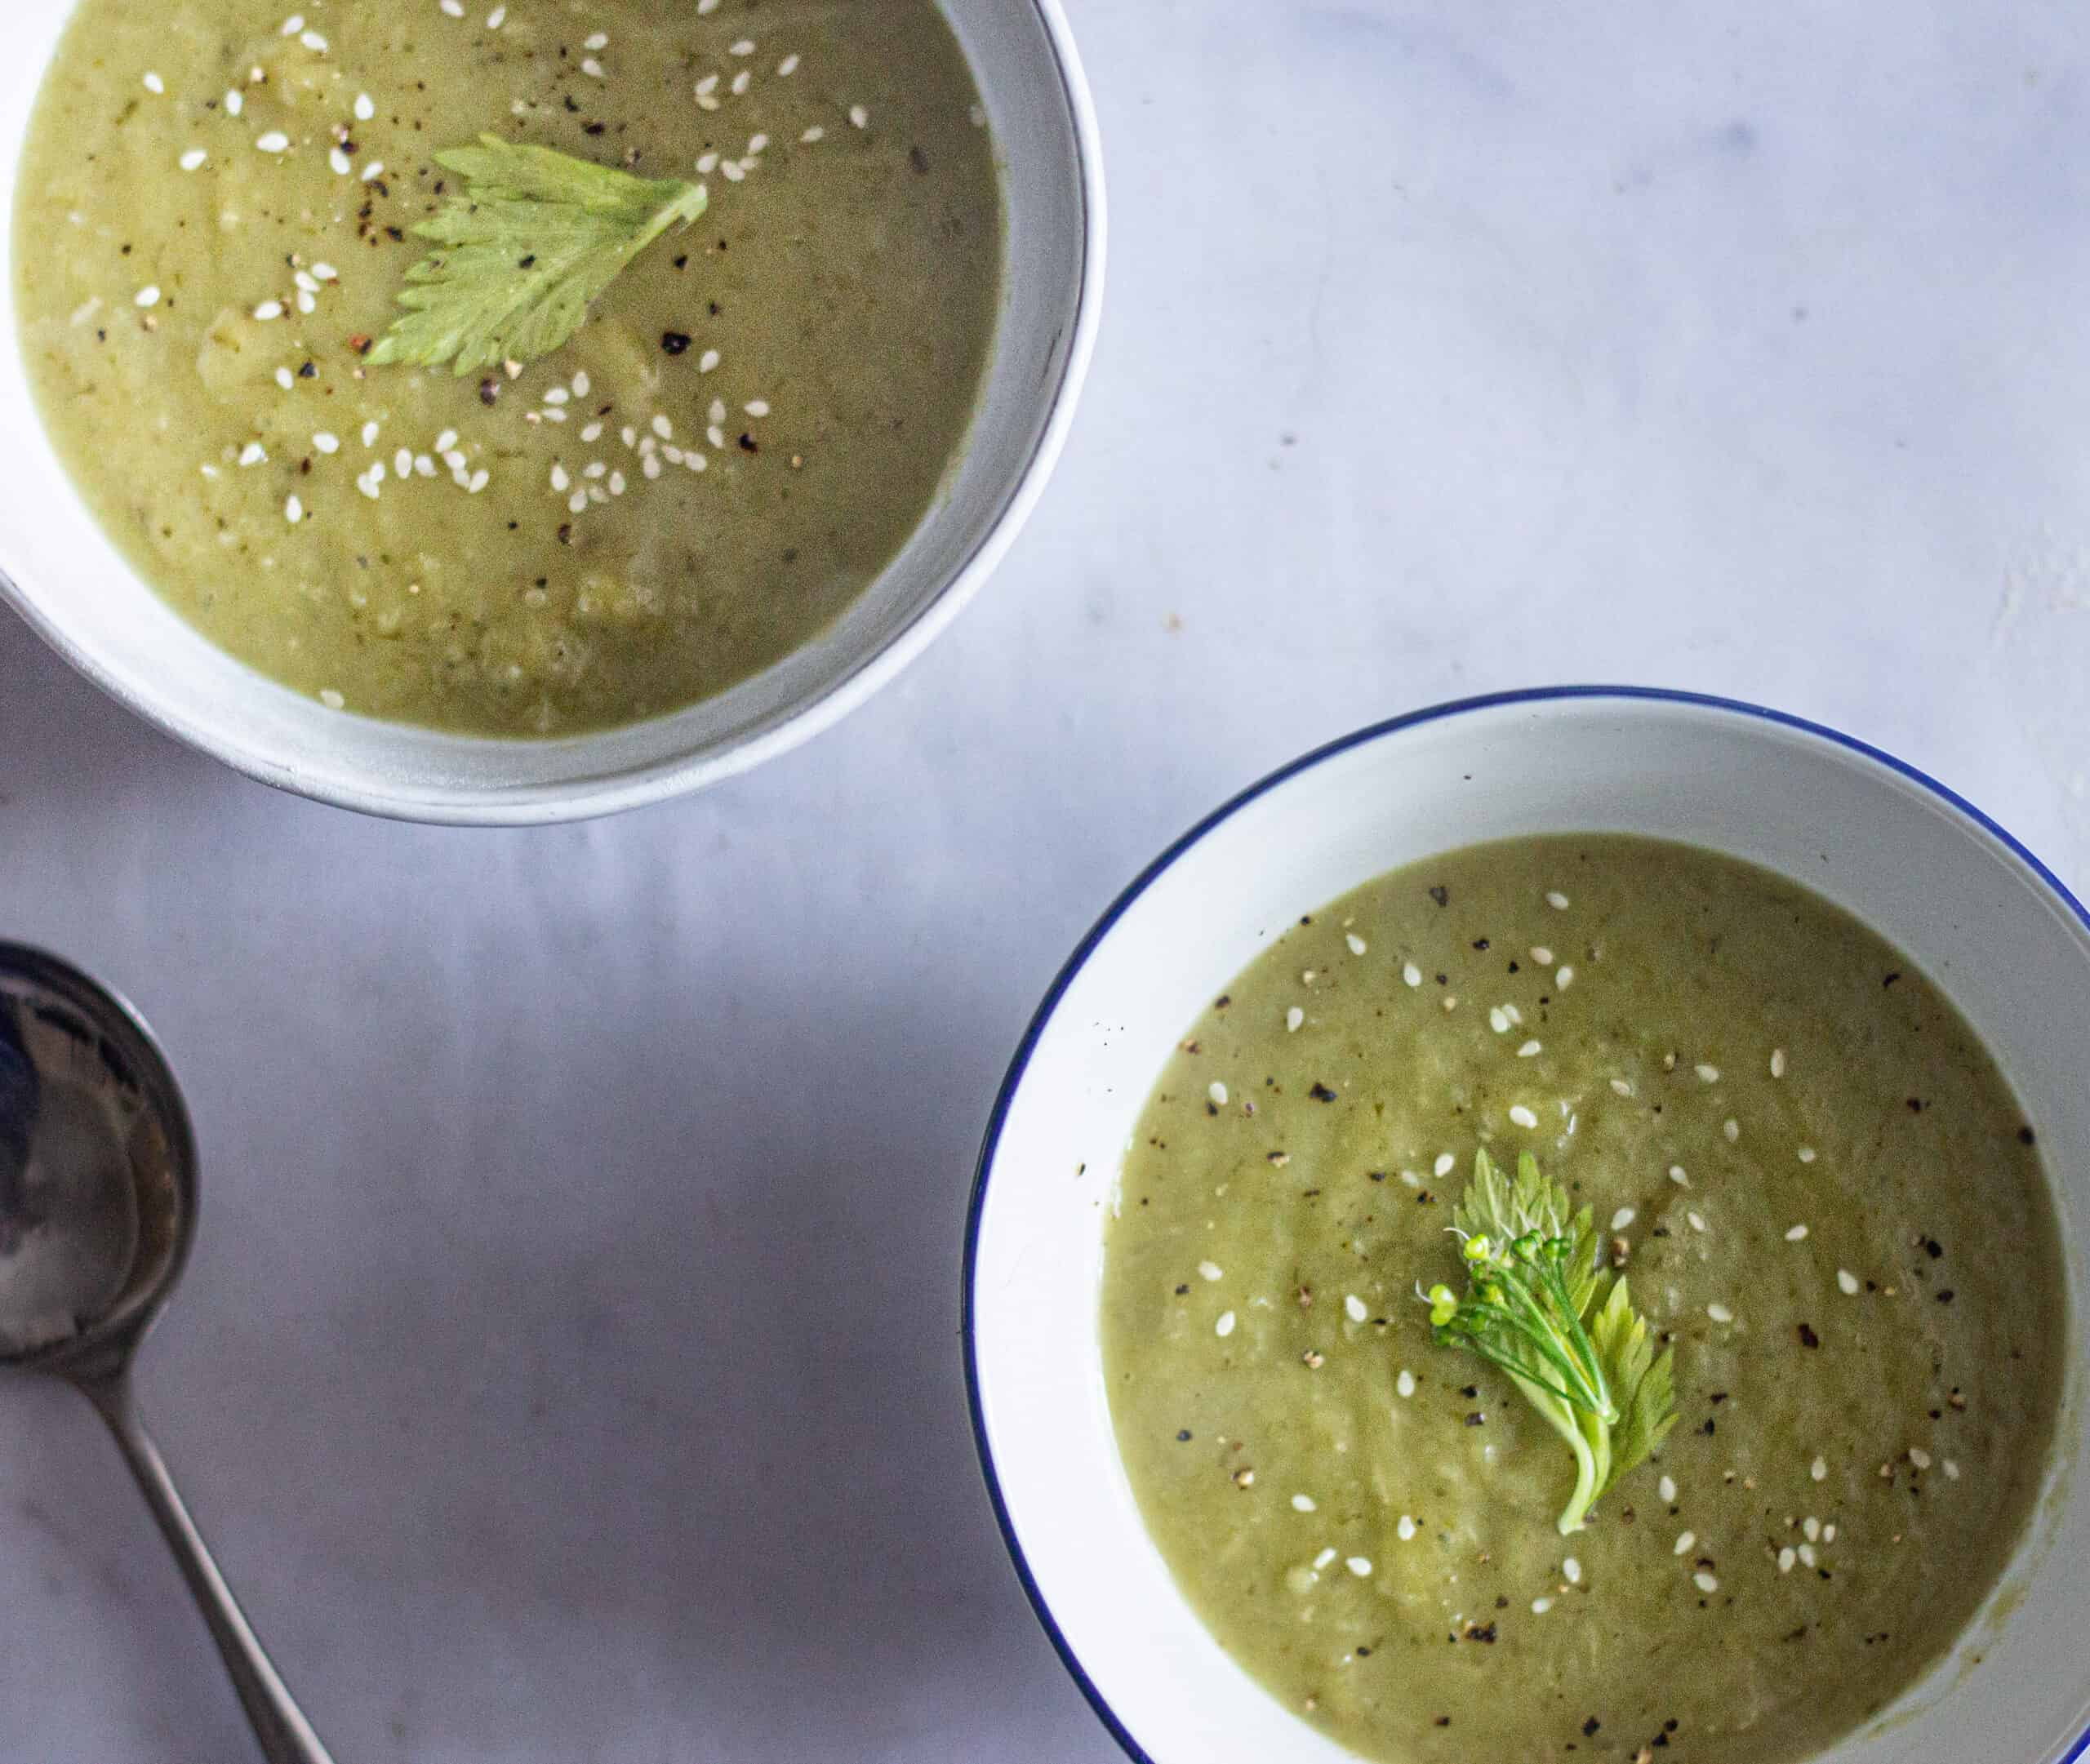 Two bowls of celery soup